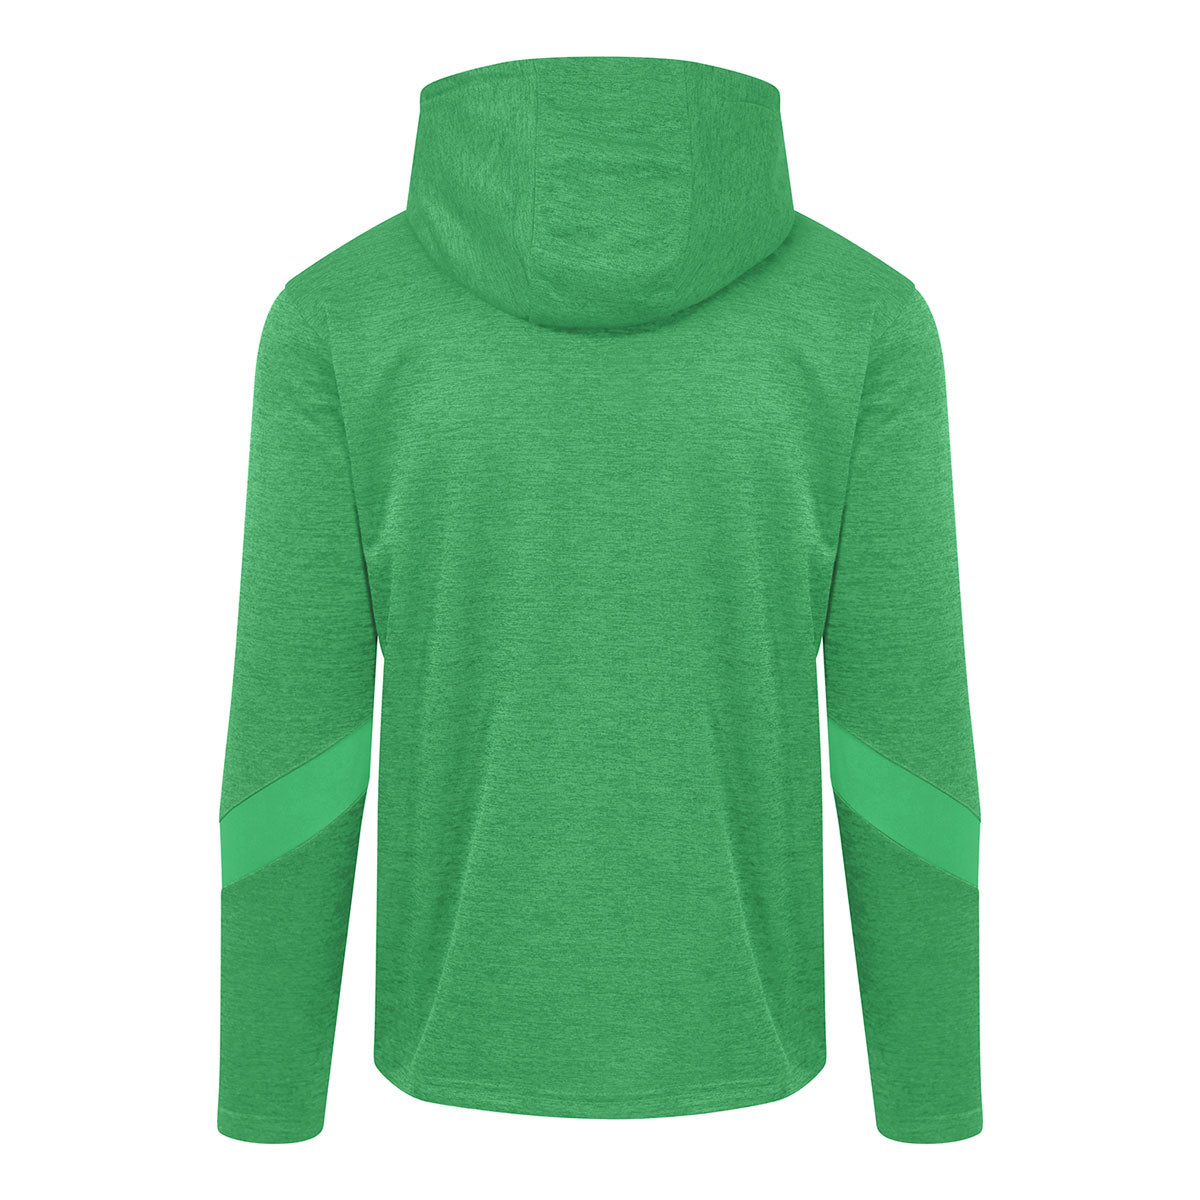 Mc Keever The Association of Irish Celtic Supporters Clubs Core 22 1/4 Zip Hoodie - Youth - Green